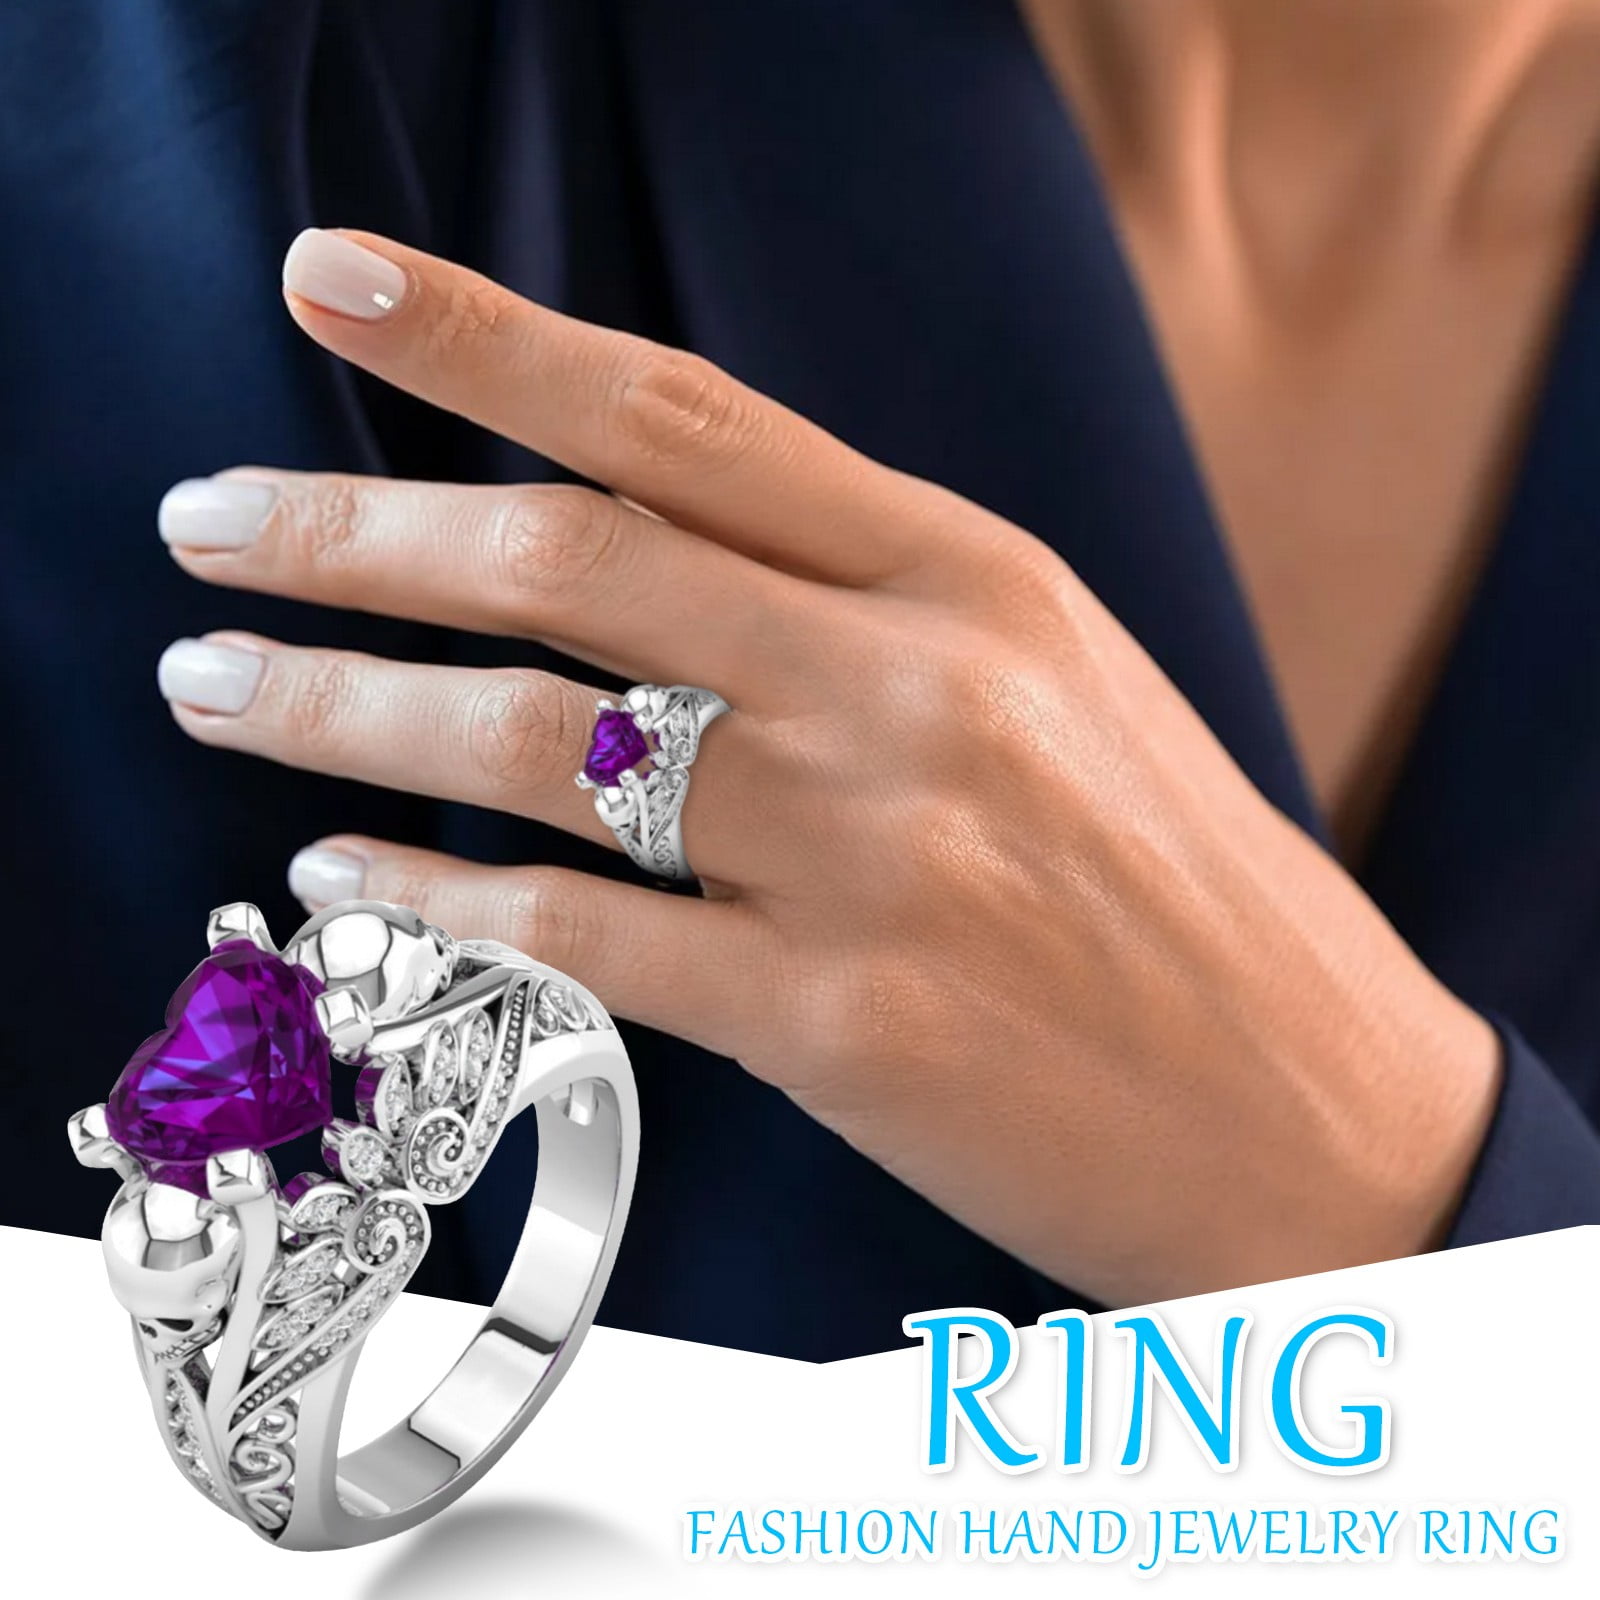 Baocc Ring Women Ring Colorful Zircon Wedding Jewelry Rings Size Alloy 6-10  Gift Finger Accessories Purple 